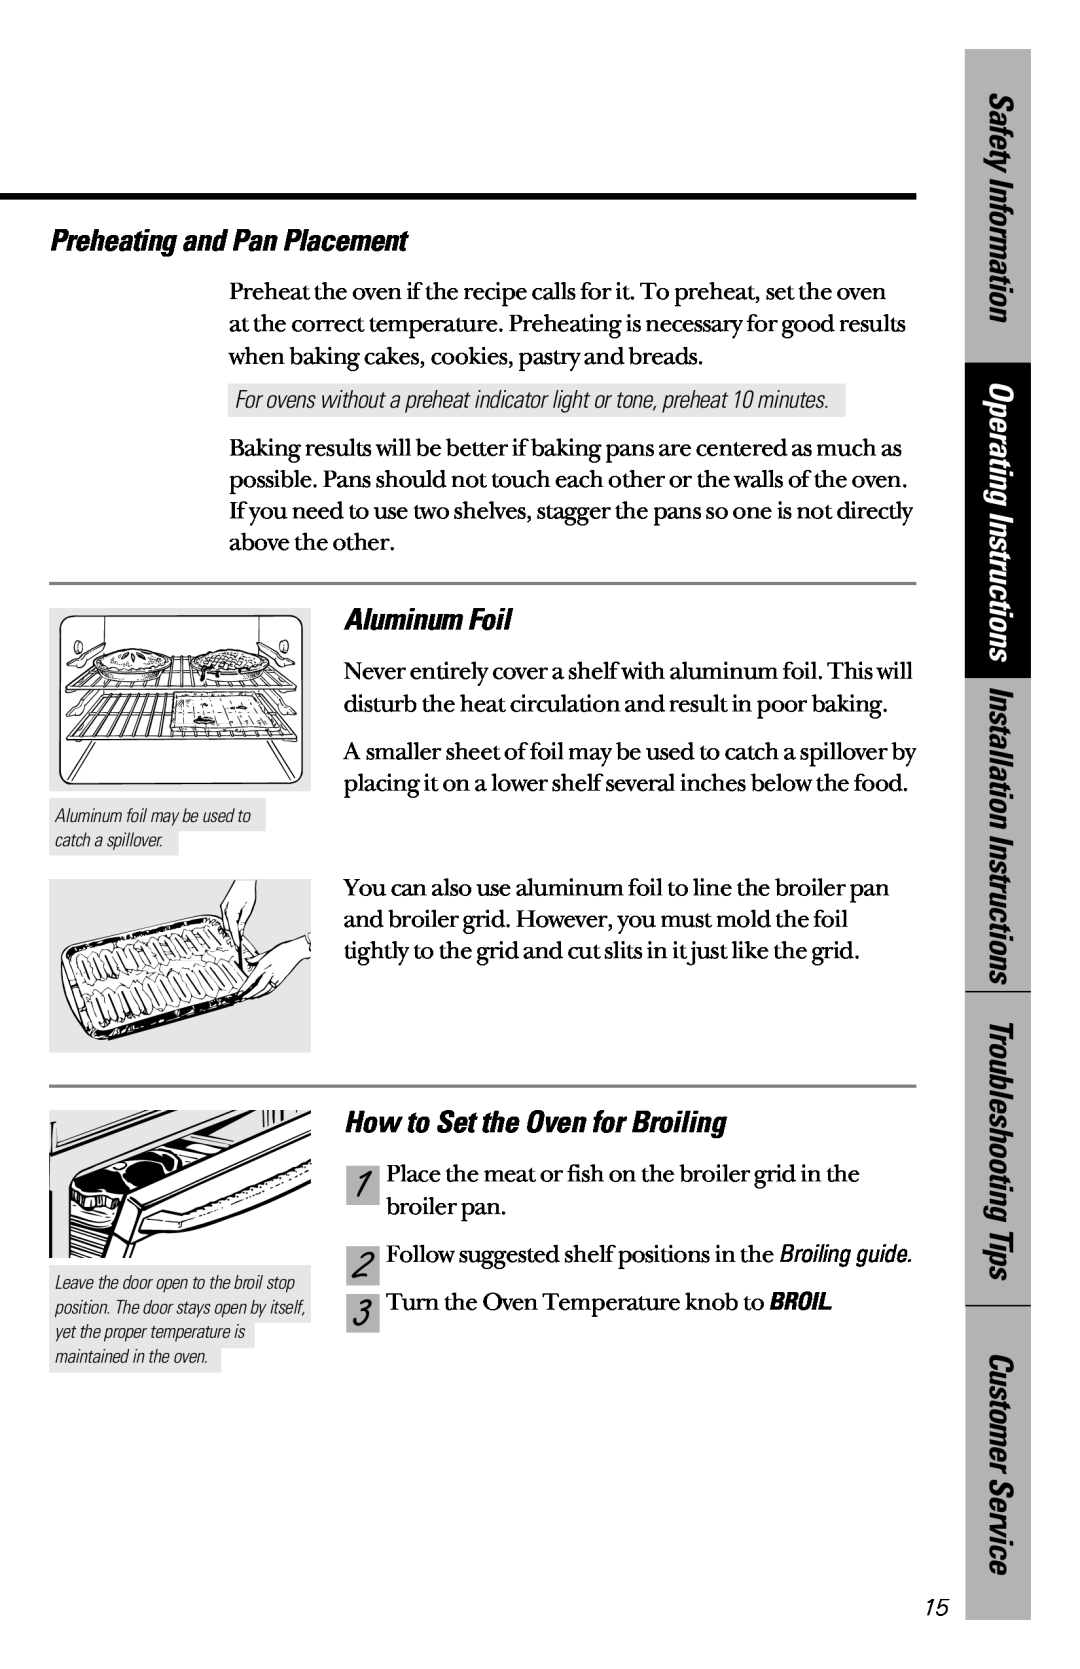 GE JBP46 Safety Information Operating Instructions Installation Instructions, Preheating and Pan Placement, Aluminum Foil 